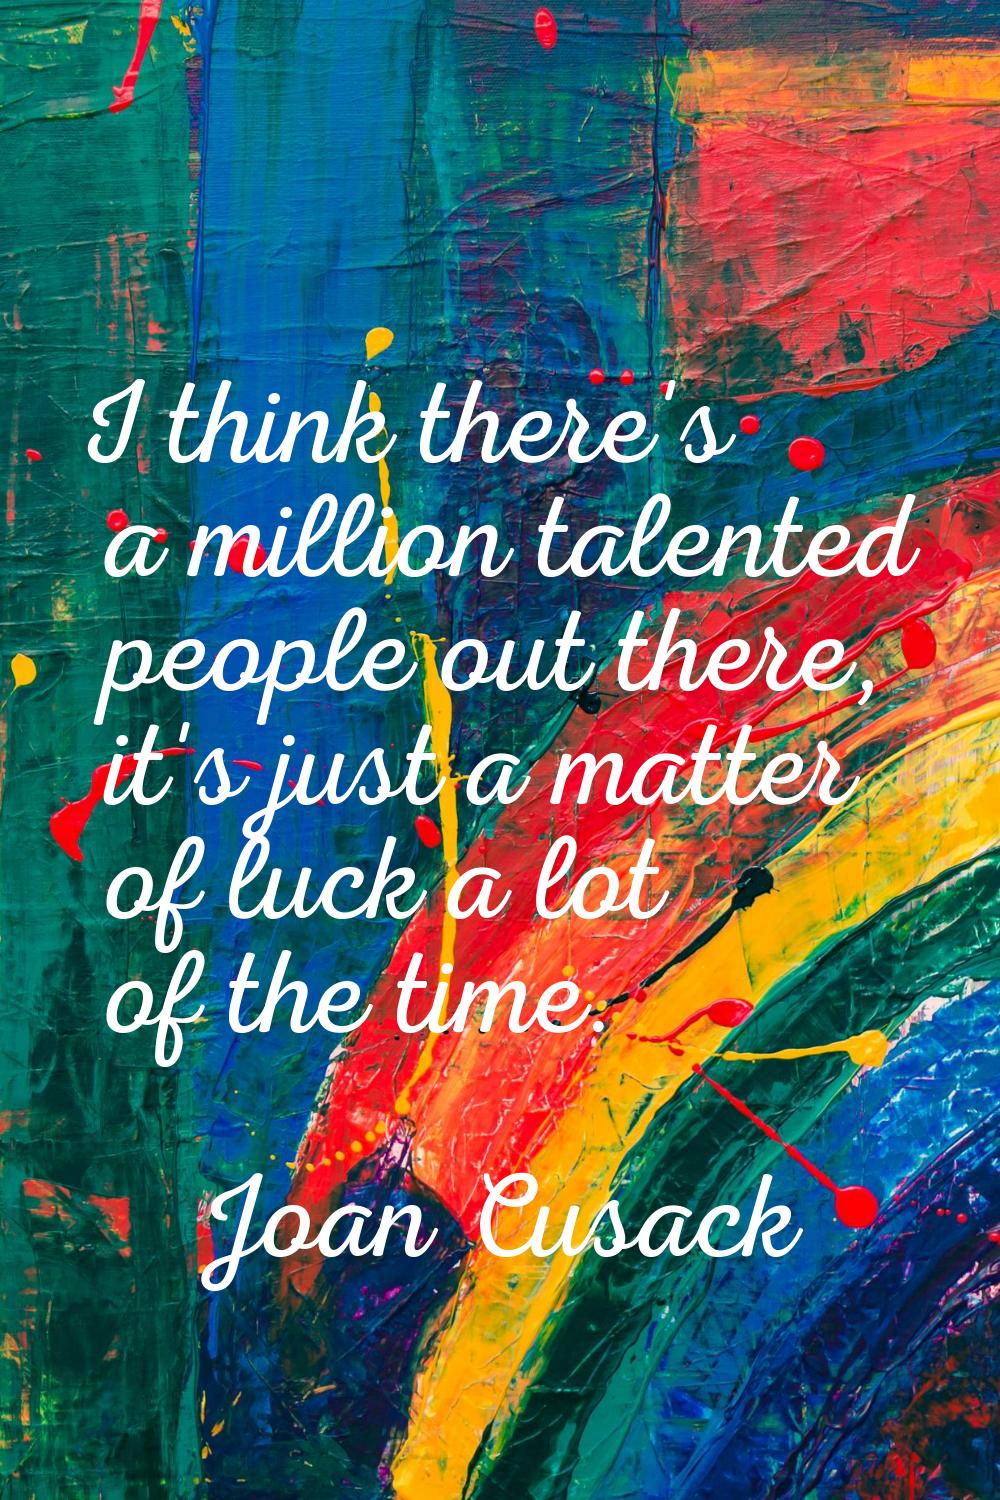 I think there's a million talented people out there, it's just a matter of luck a lot of the time.